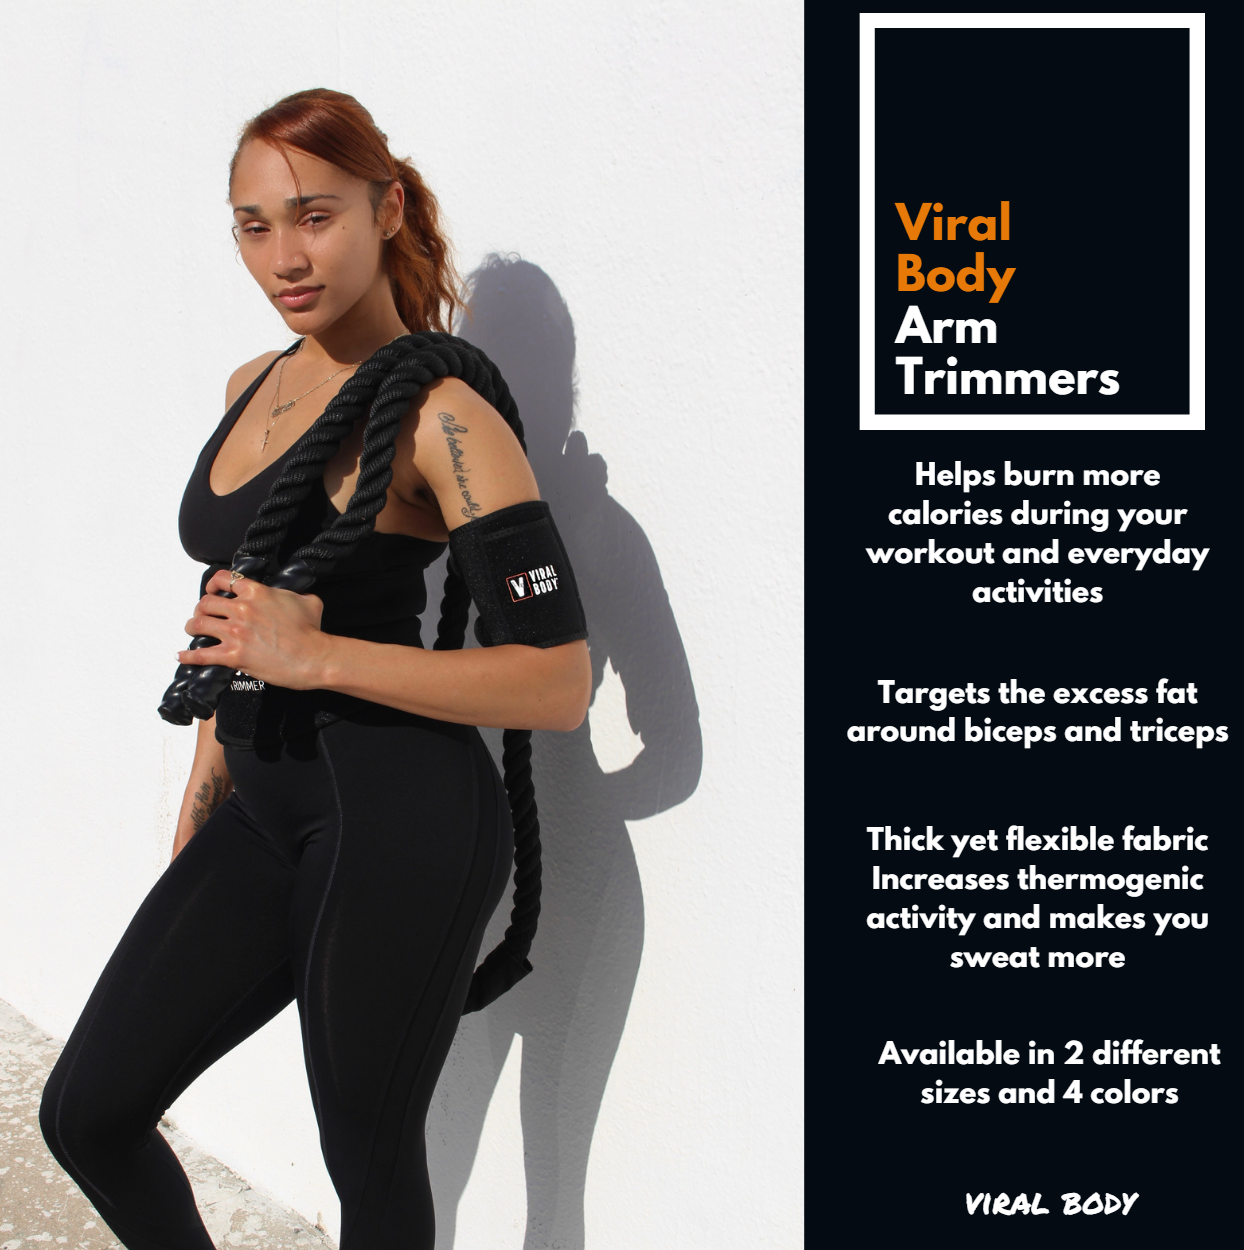 Viral Body® Arm Trimmers